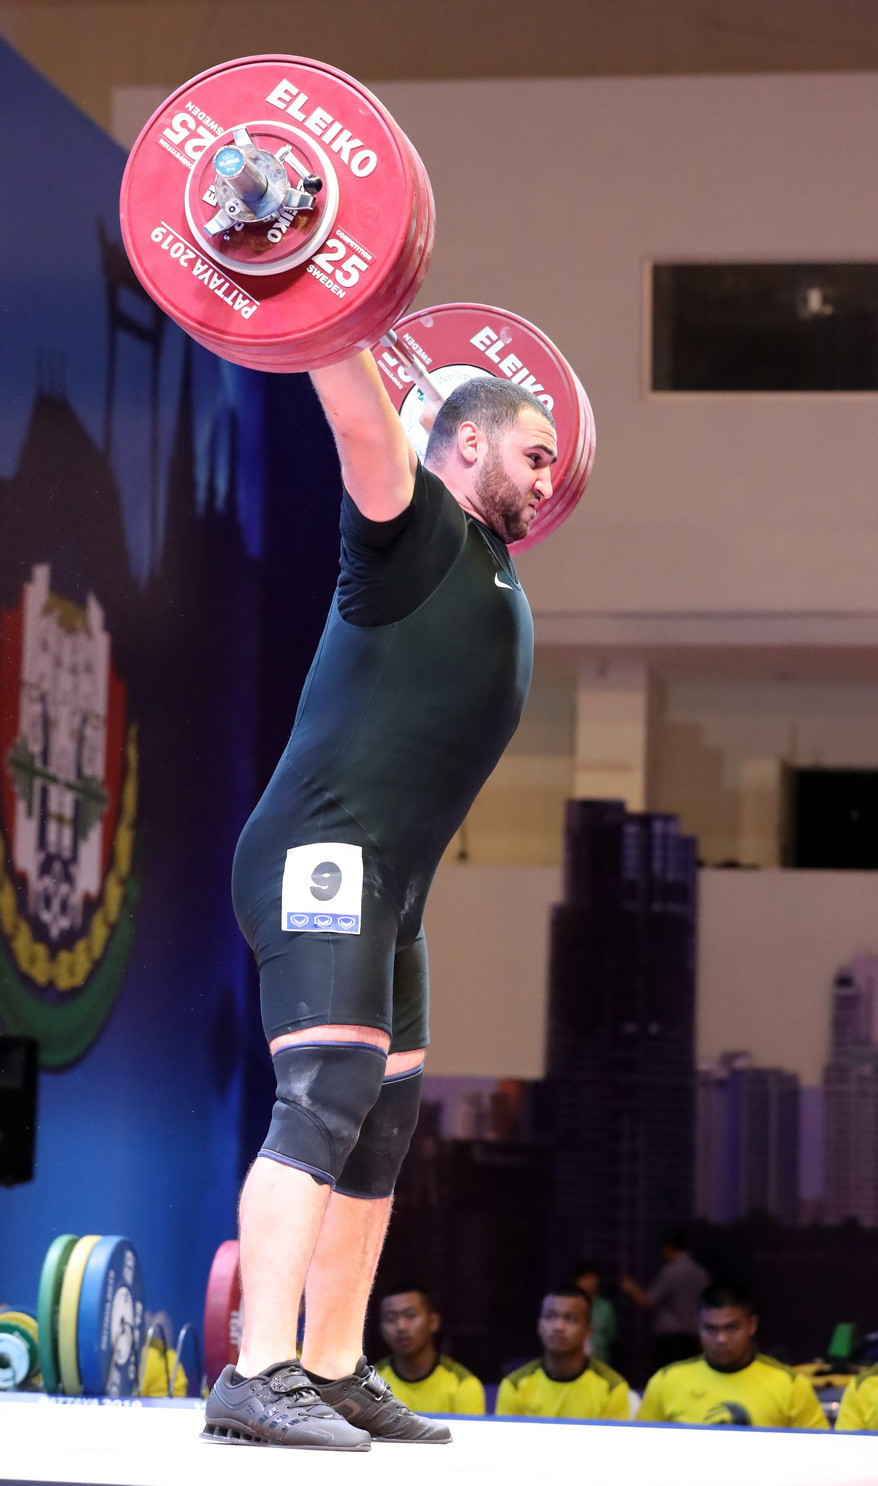 In doing so, the 22-year-old was the last of three lifters to break the snatch world record ©IWF